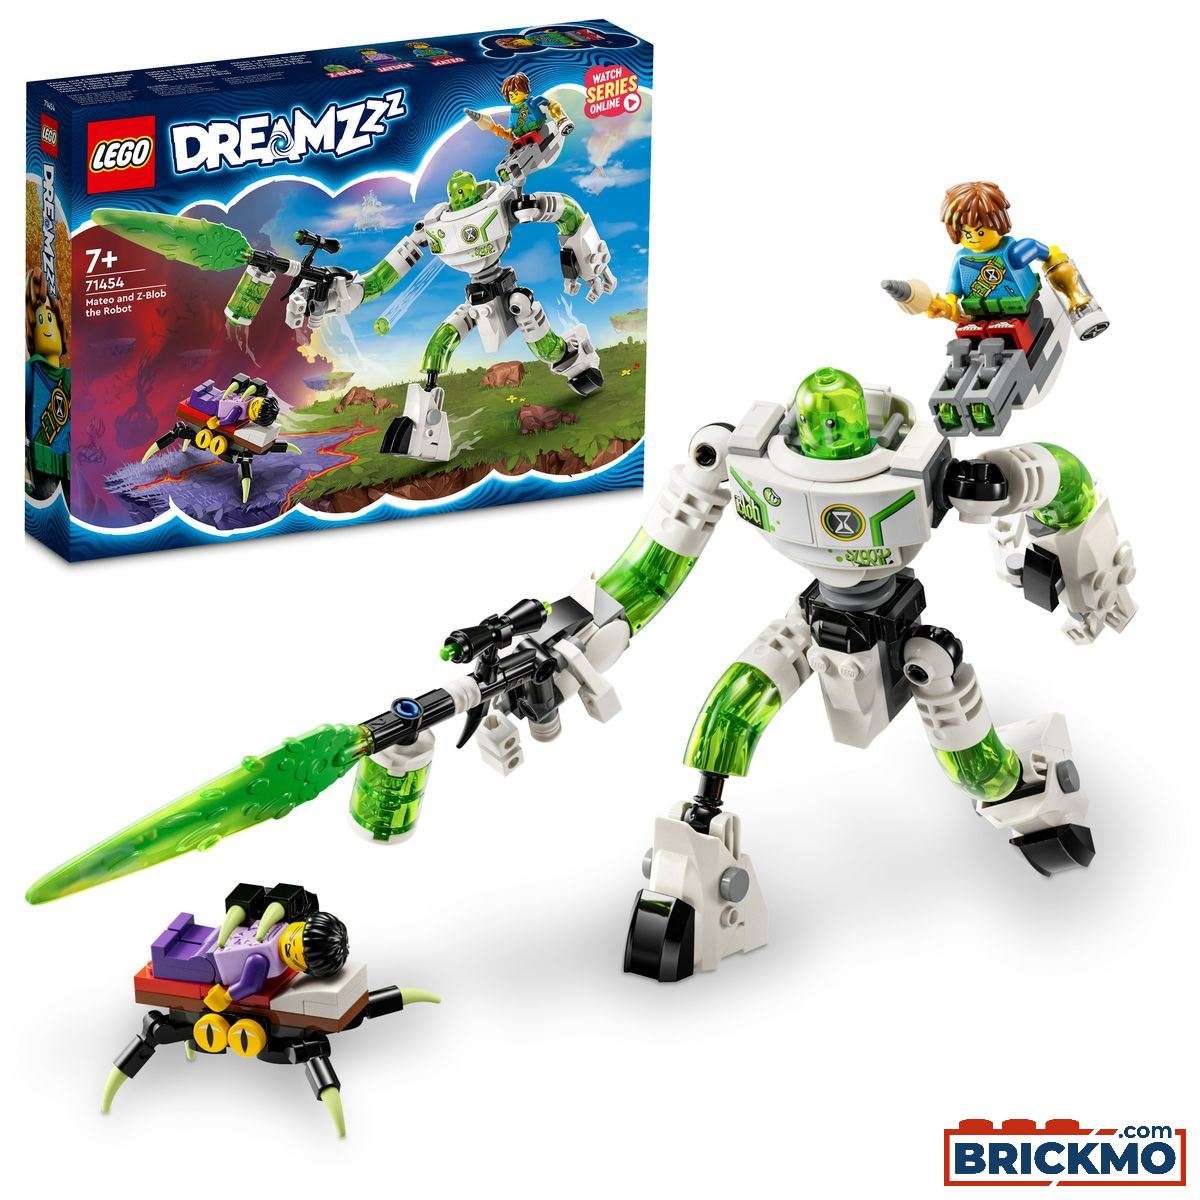 LEGO DreamZzz 71454 Mateo and Z-Blob the Robot 71454